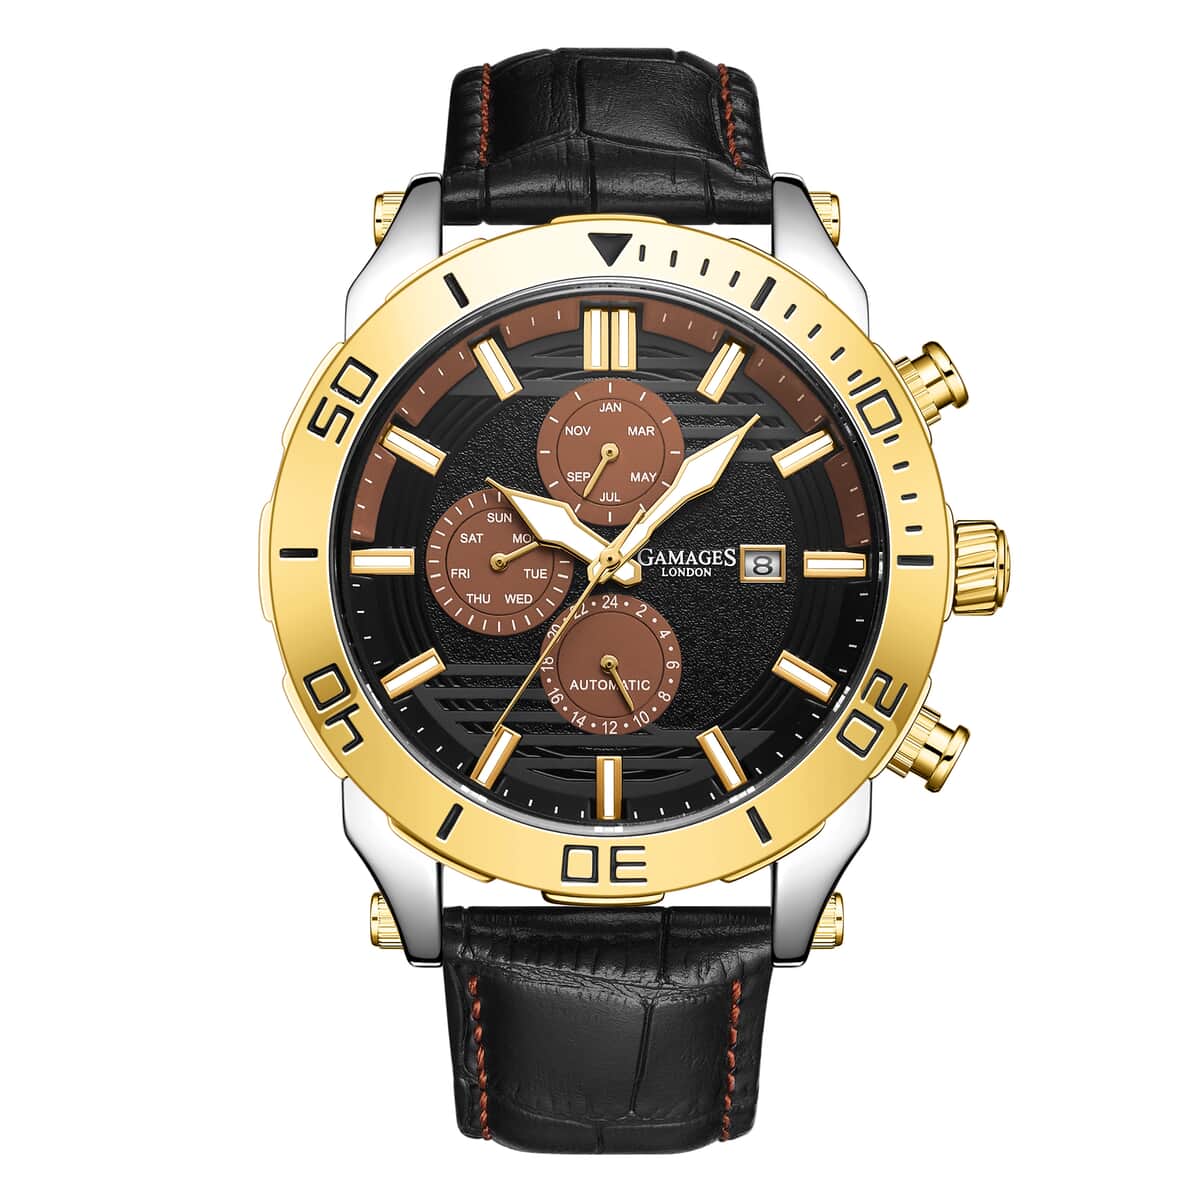 Gamages of London Limited Edition Hand Assembled Velocity Racer Automatic Movement Black Genuine Leather Strap Watch (45mm) with FREE GIFT PEN image number 0